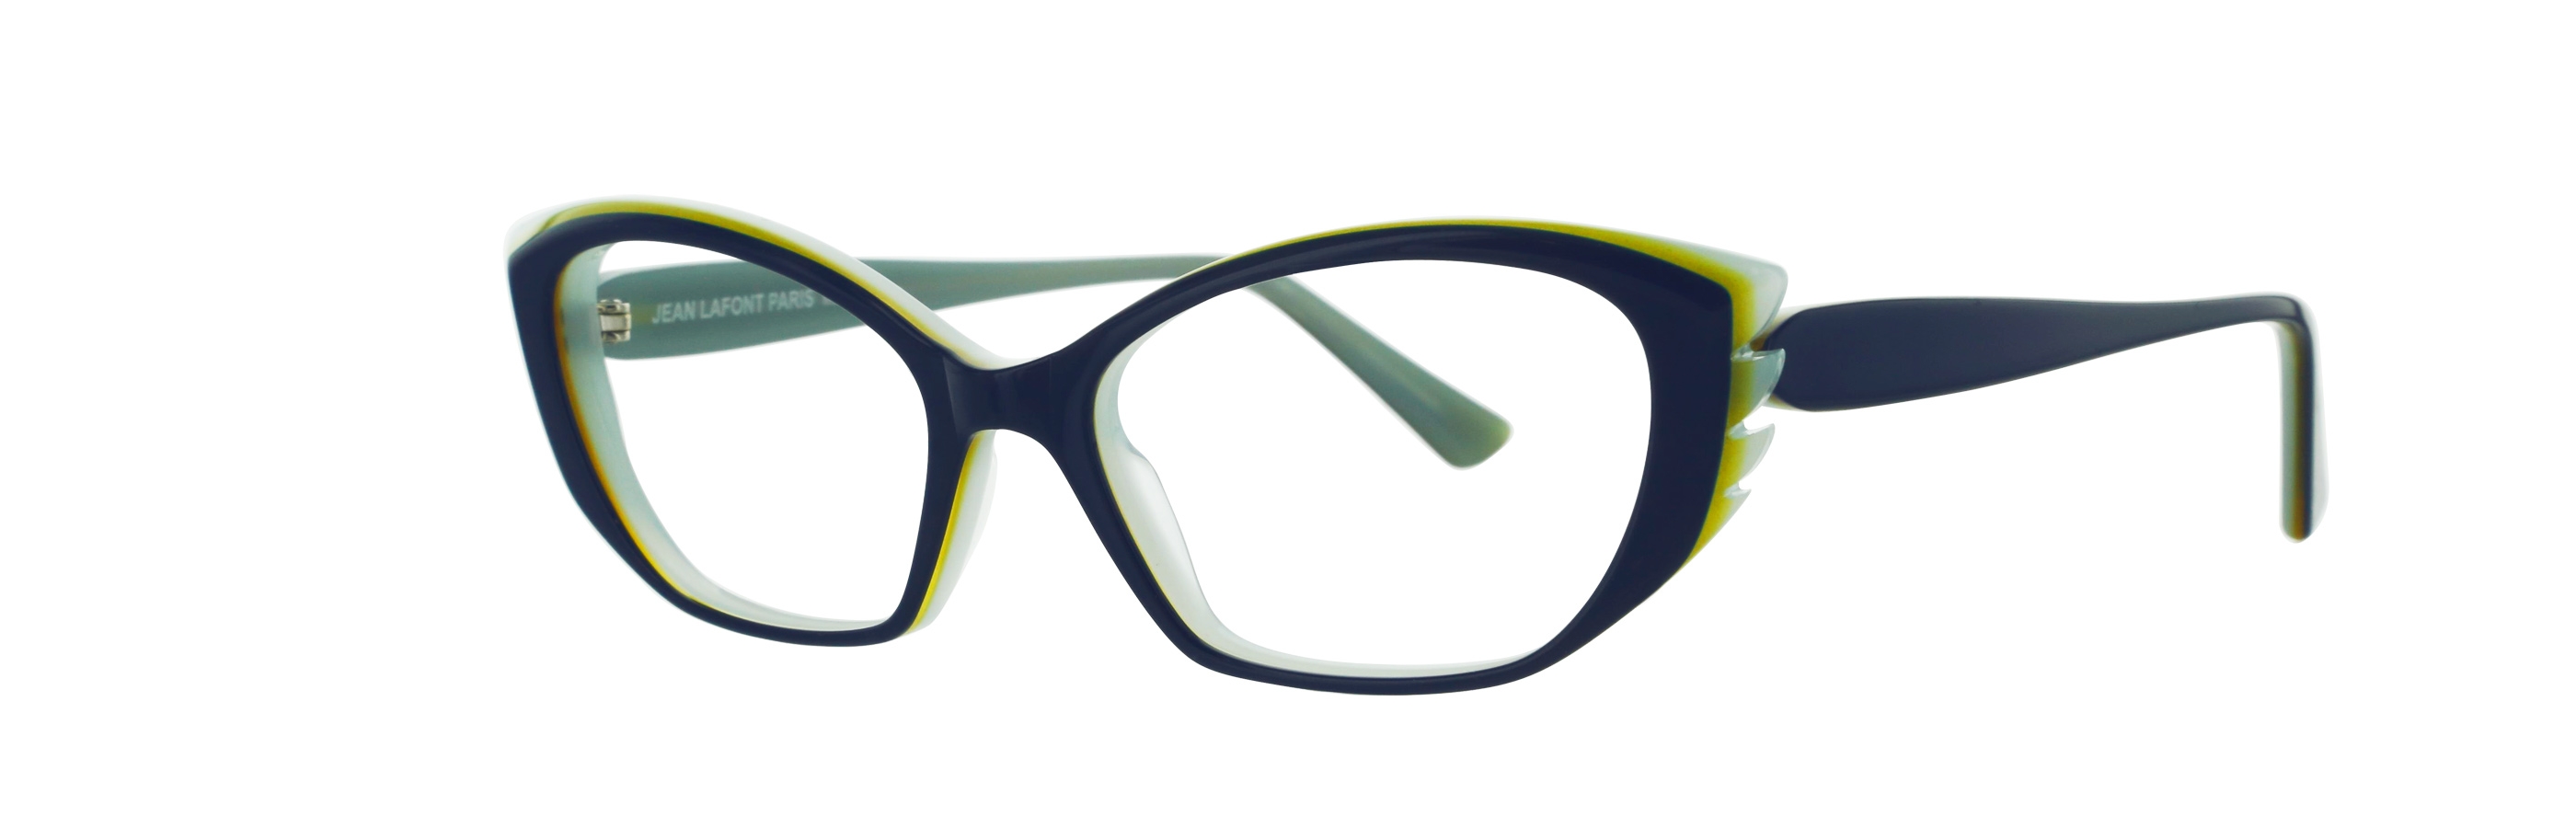 LAFONT FRENCHY 3134